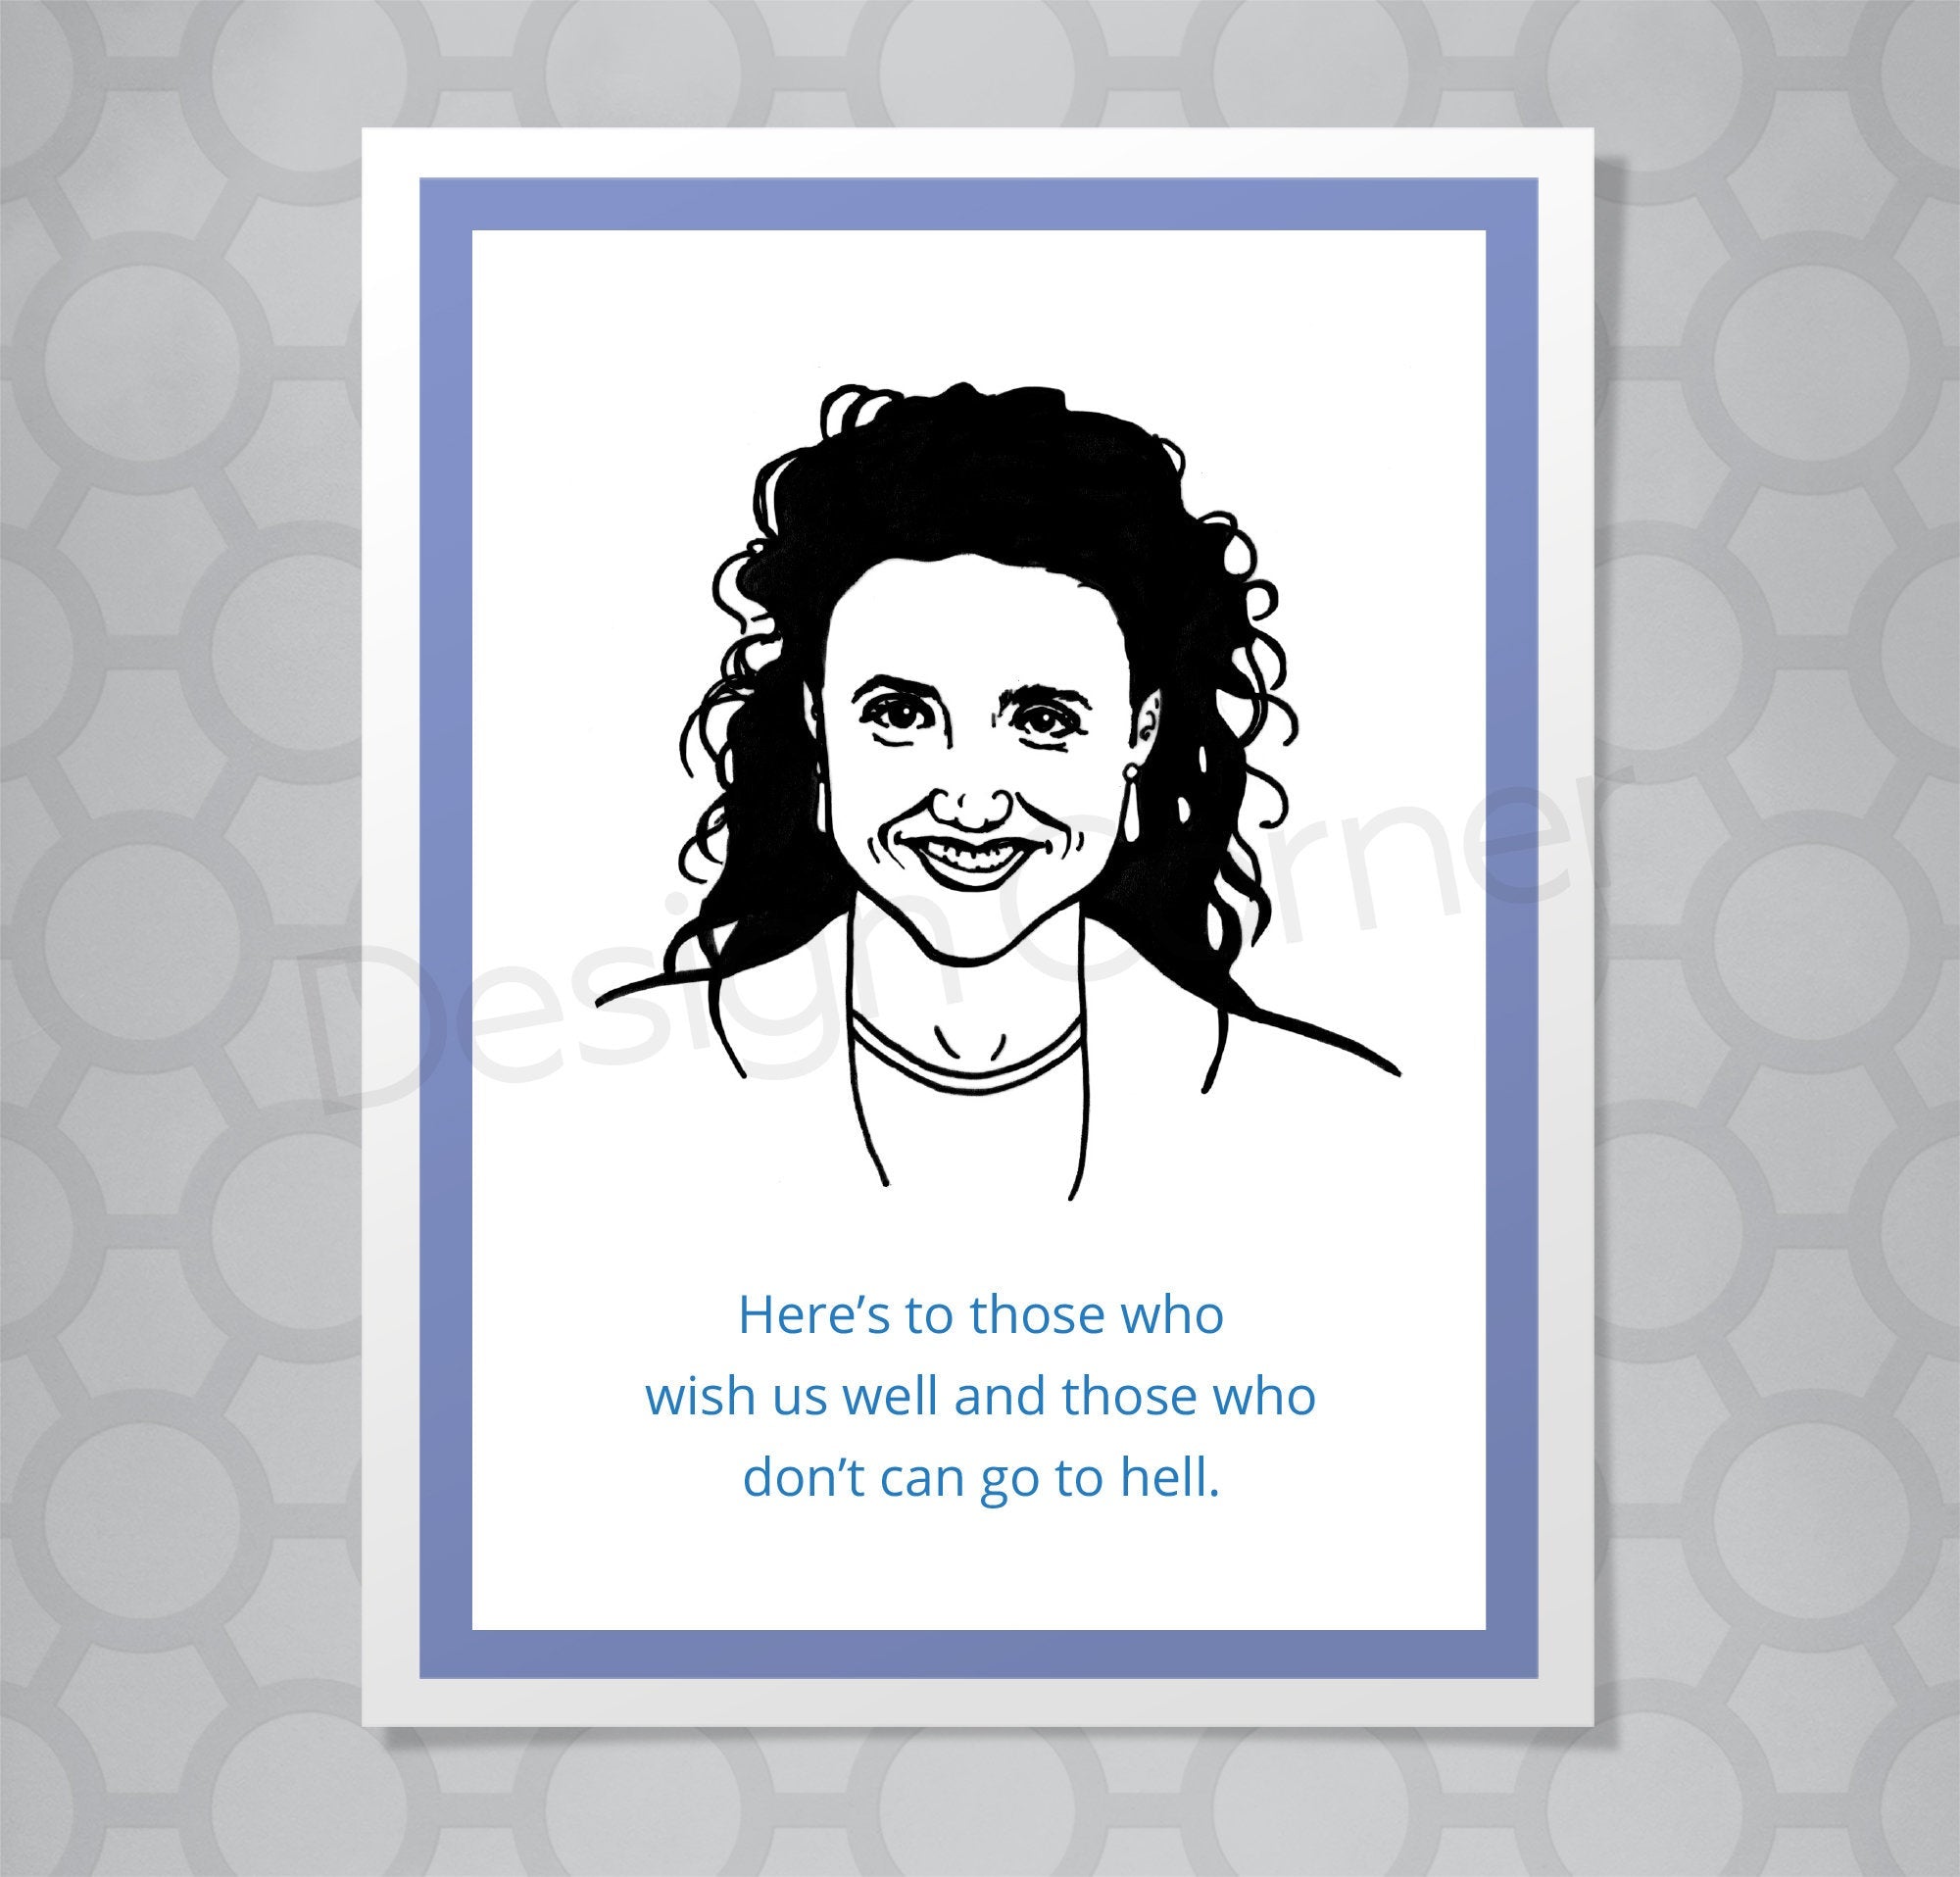 Greeting card with illustration of Seinfeld's Elaine. Caption says "Here's to those who wish us well, and those who don't can go to hell."